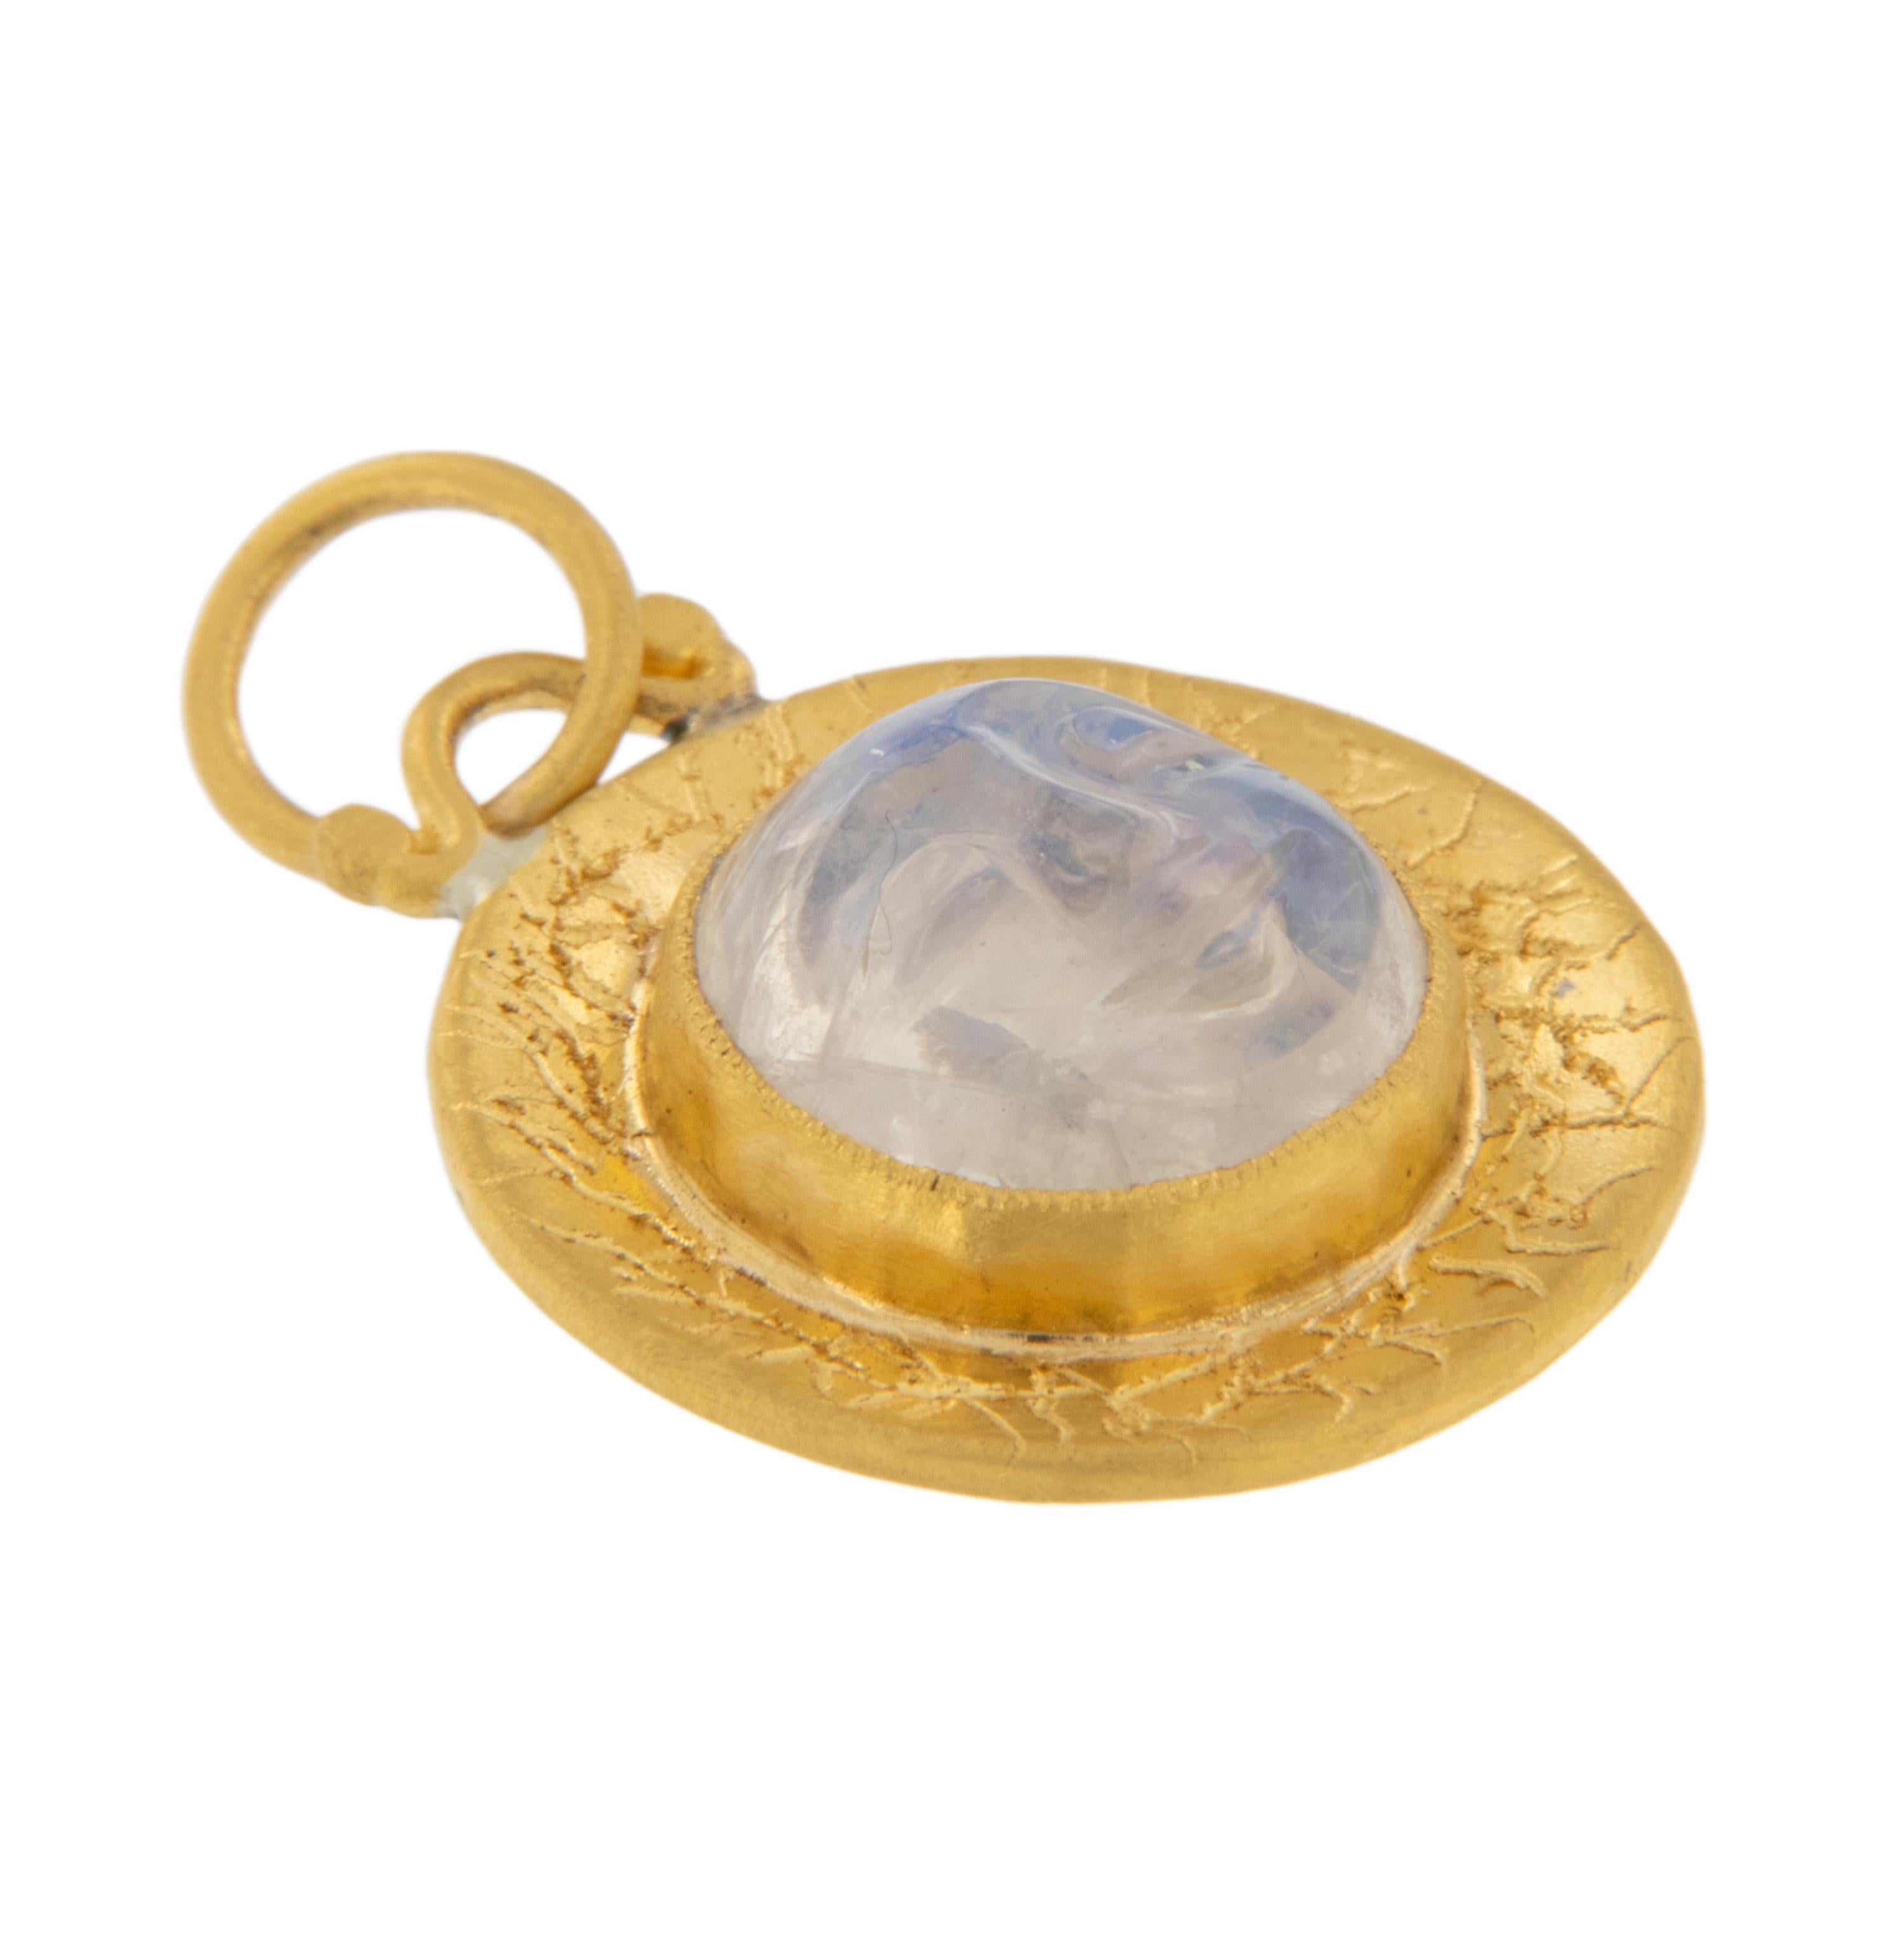 Rarest of all the golds, 24 karat gold is valued by all discerning investors. With it's unmistakable warm yellow color & hammered finish this adorable pendant / charm centered around a lovely carved moonface out of moonstone is just charming. The